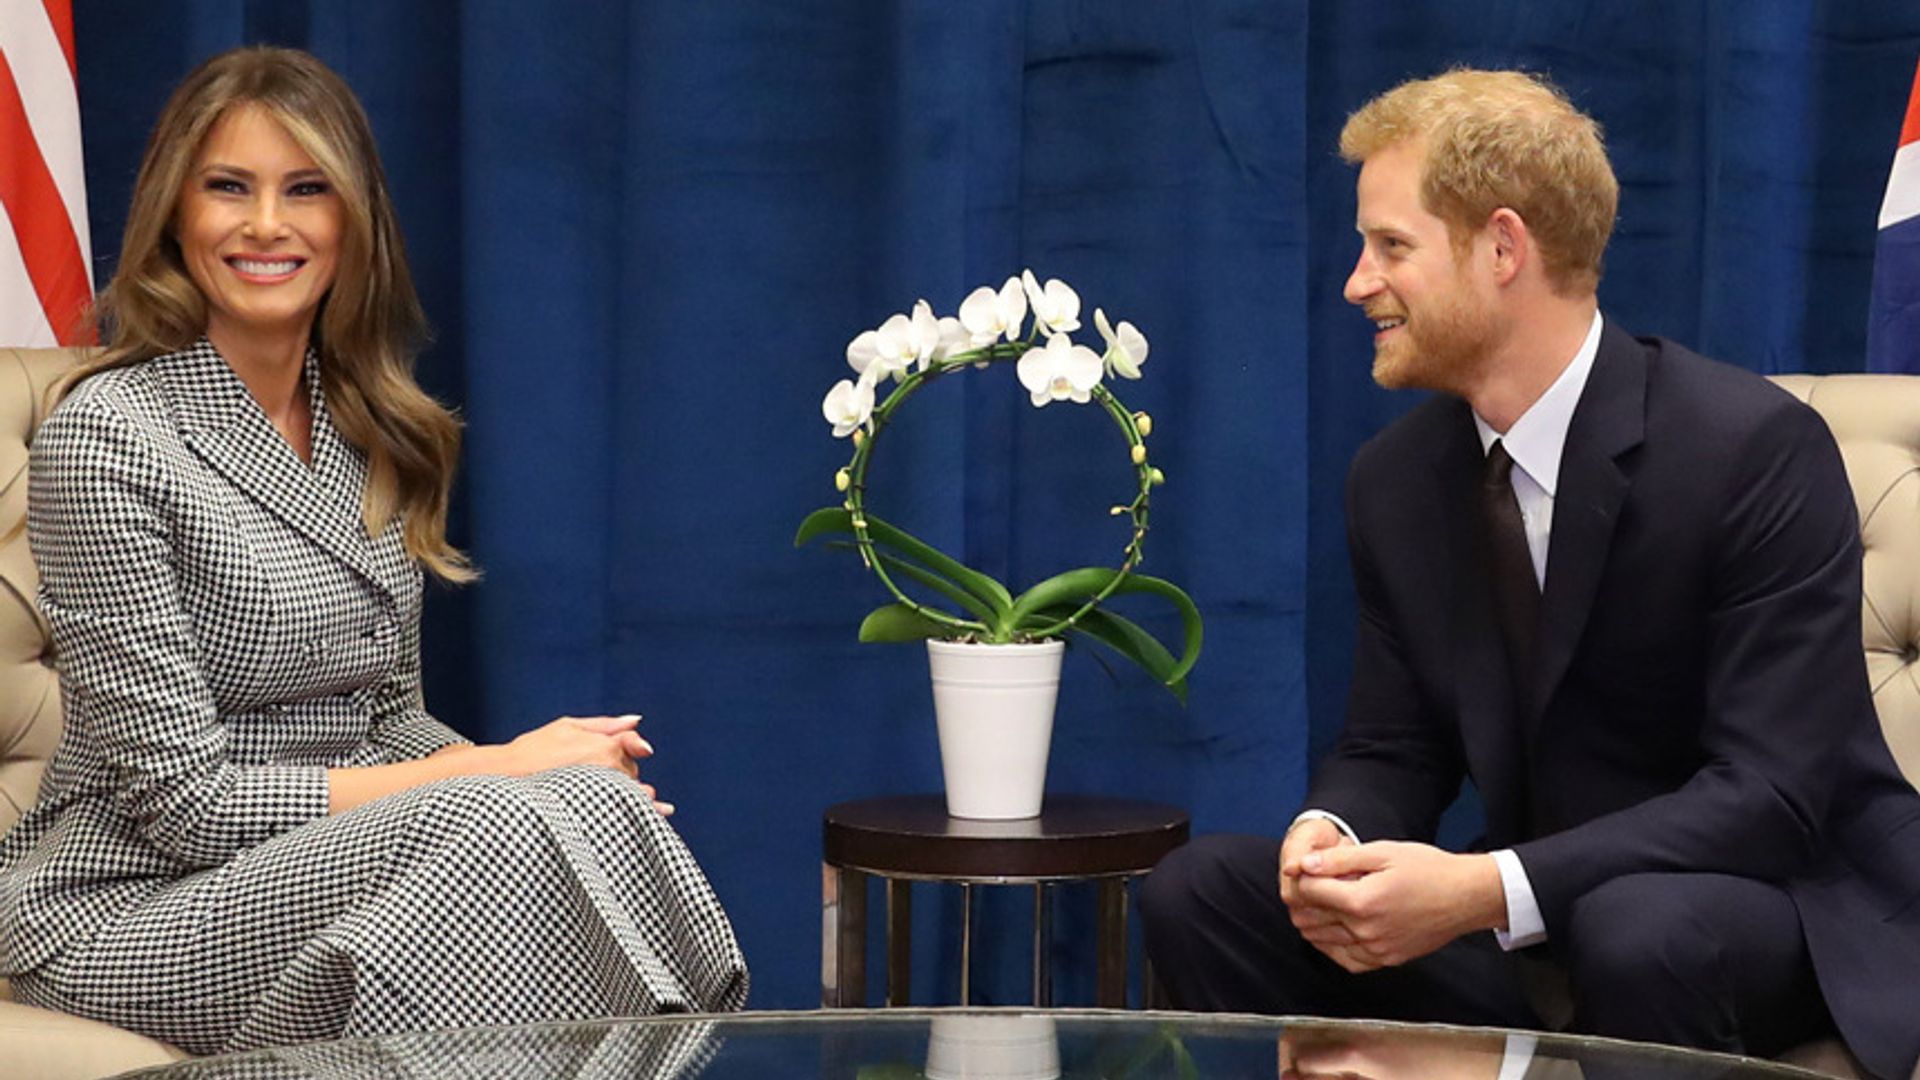 What did Prince Harry and Melania Trump talk about during their meeting?